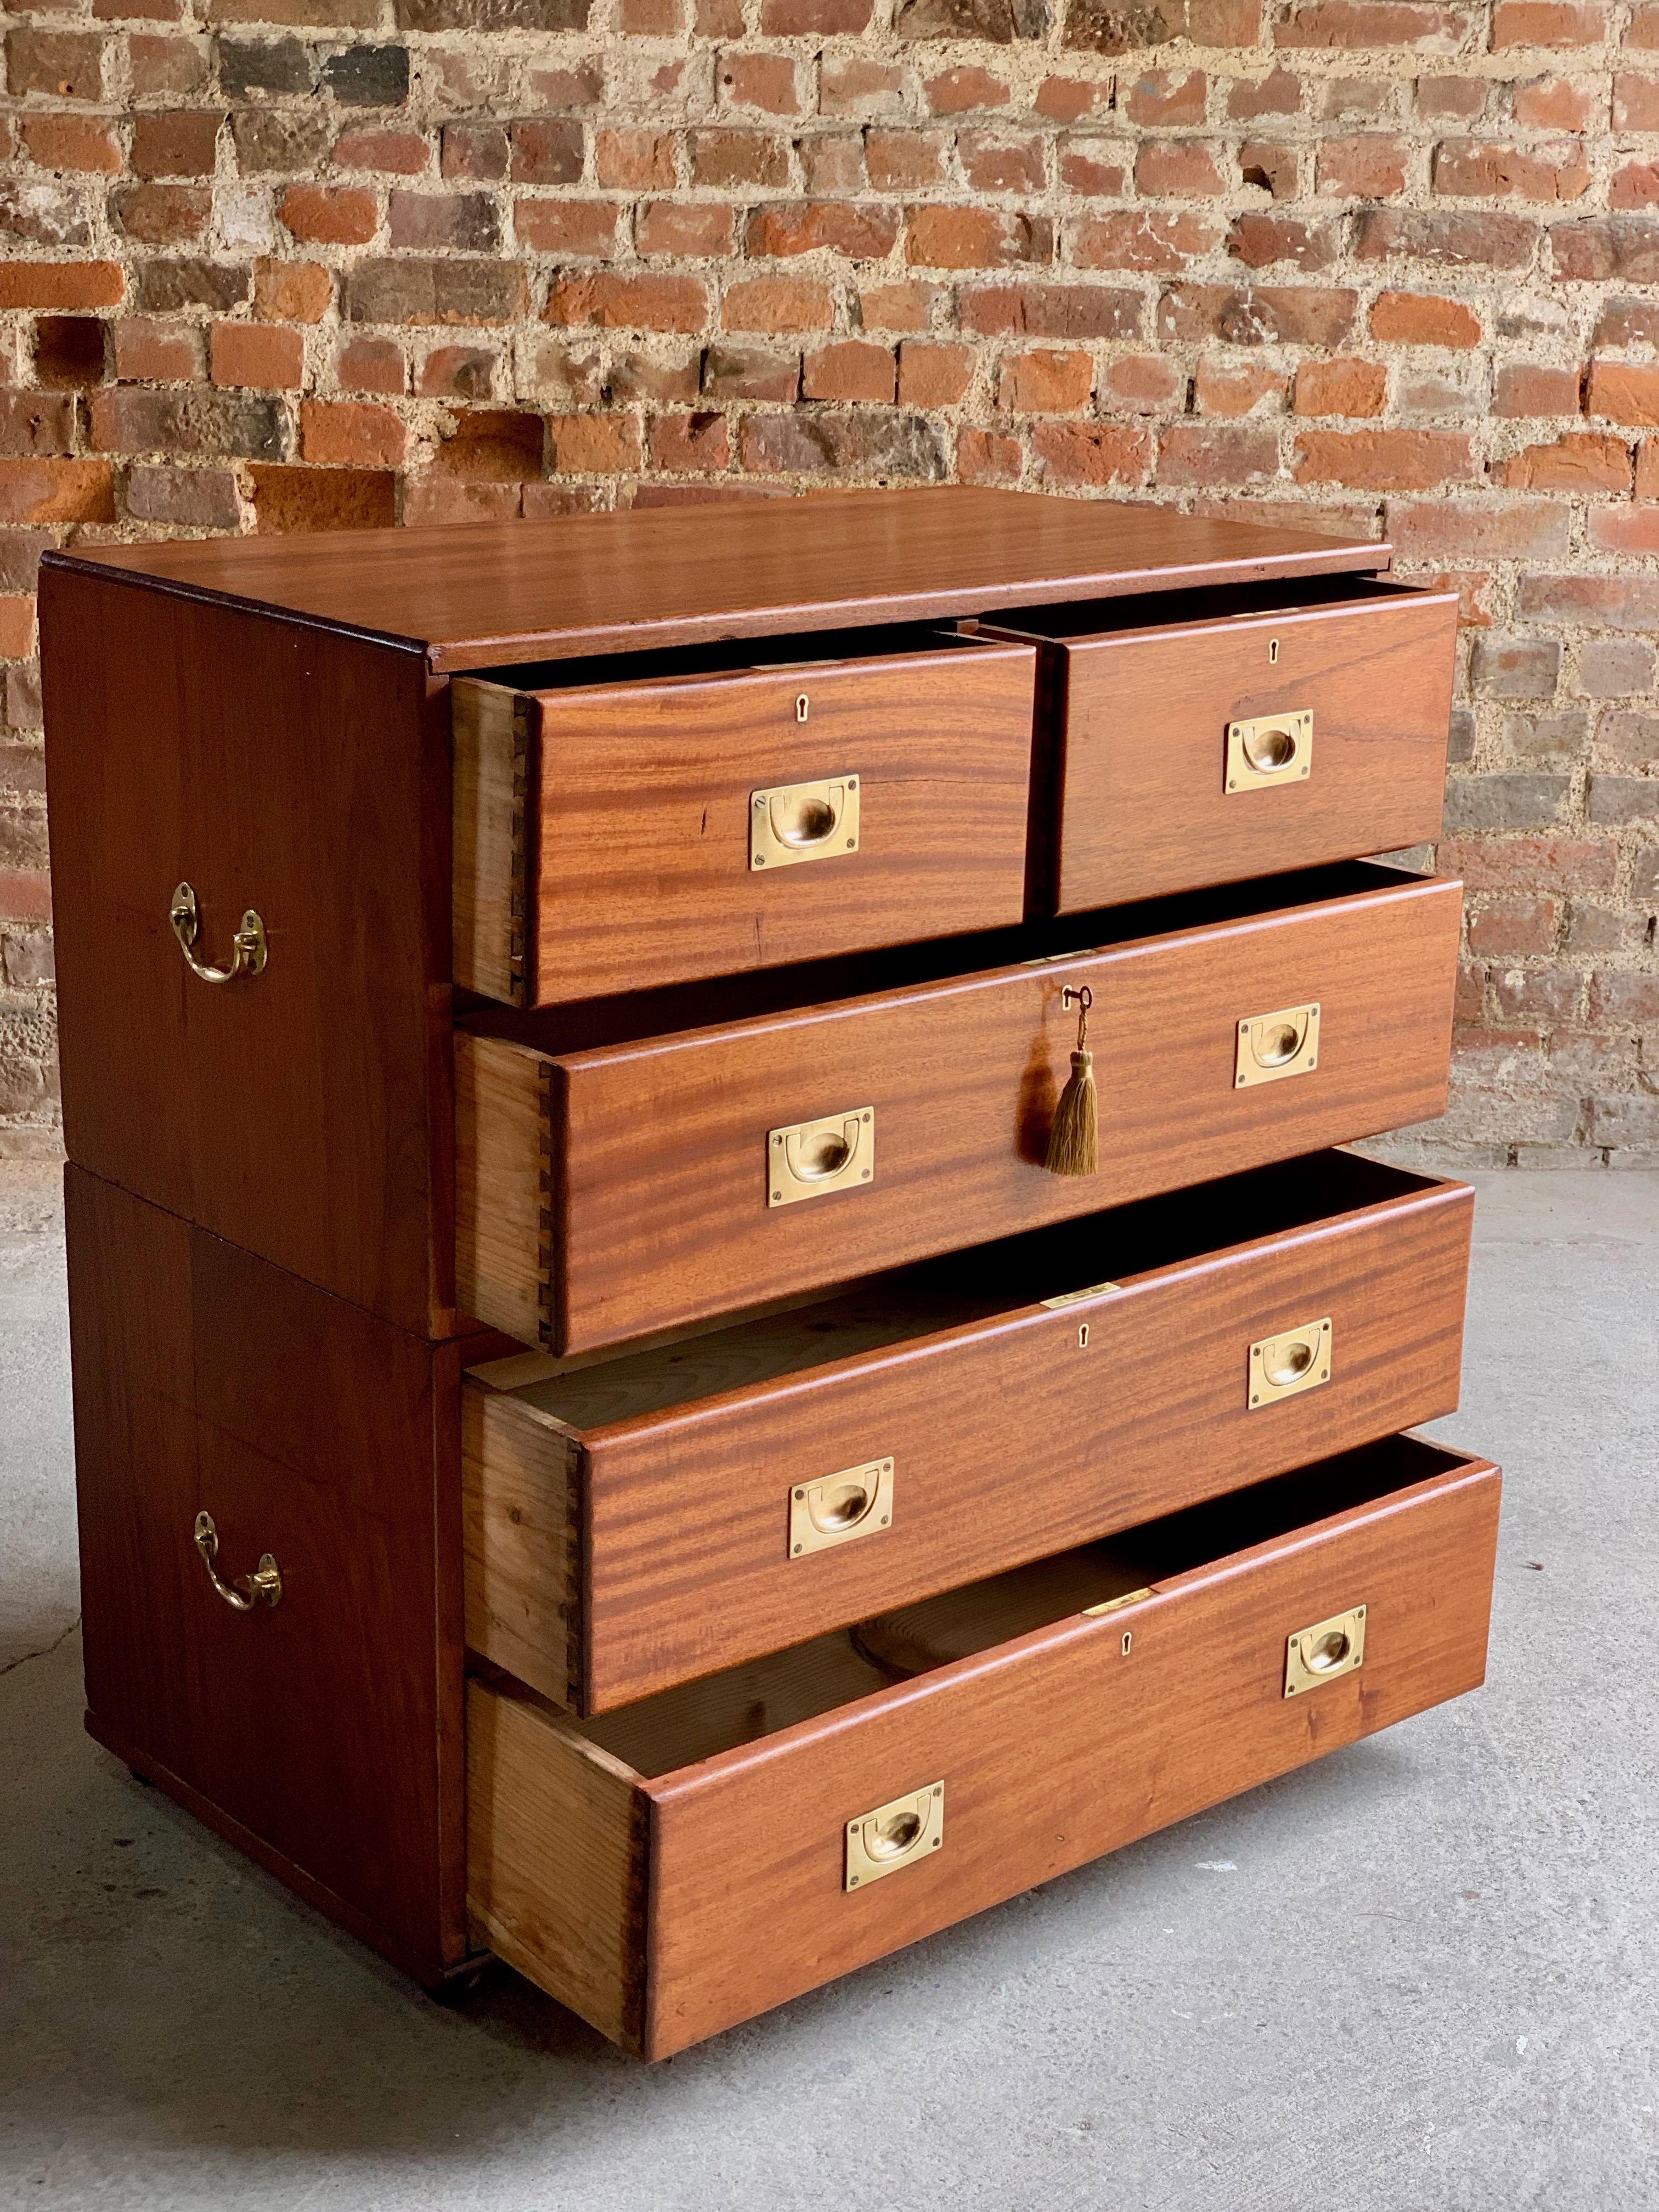 British 19th Century Military Campaign Chest of Drawers in Teak circa 1870 No 23